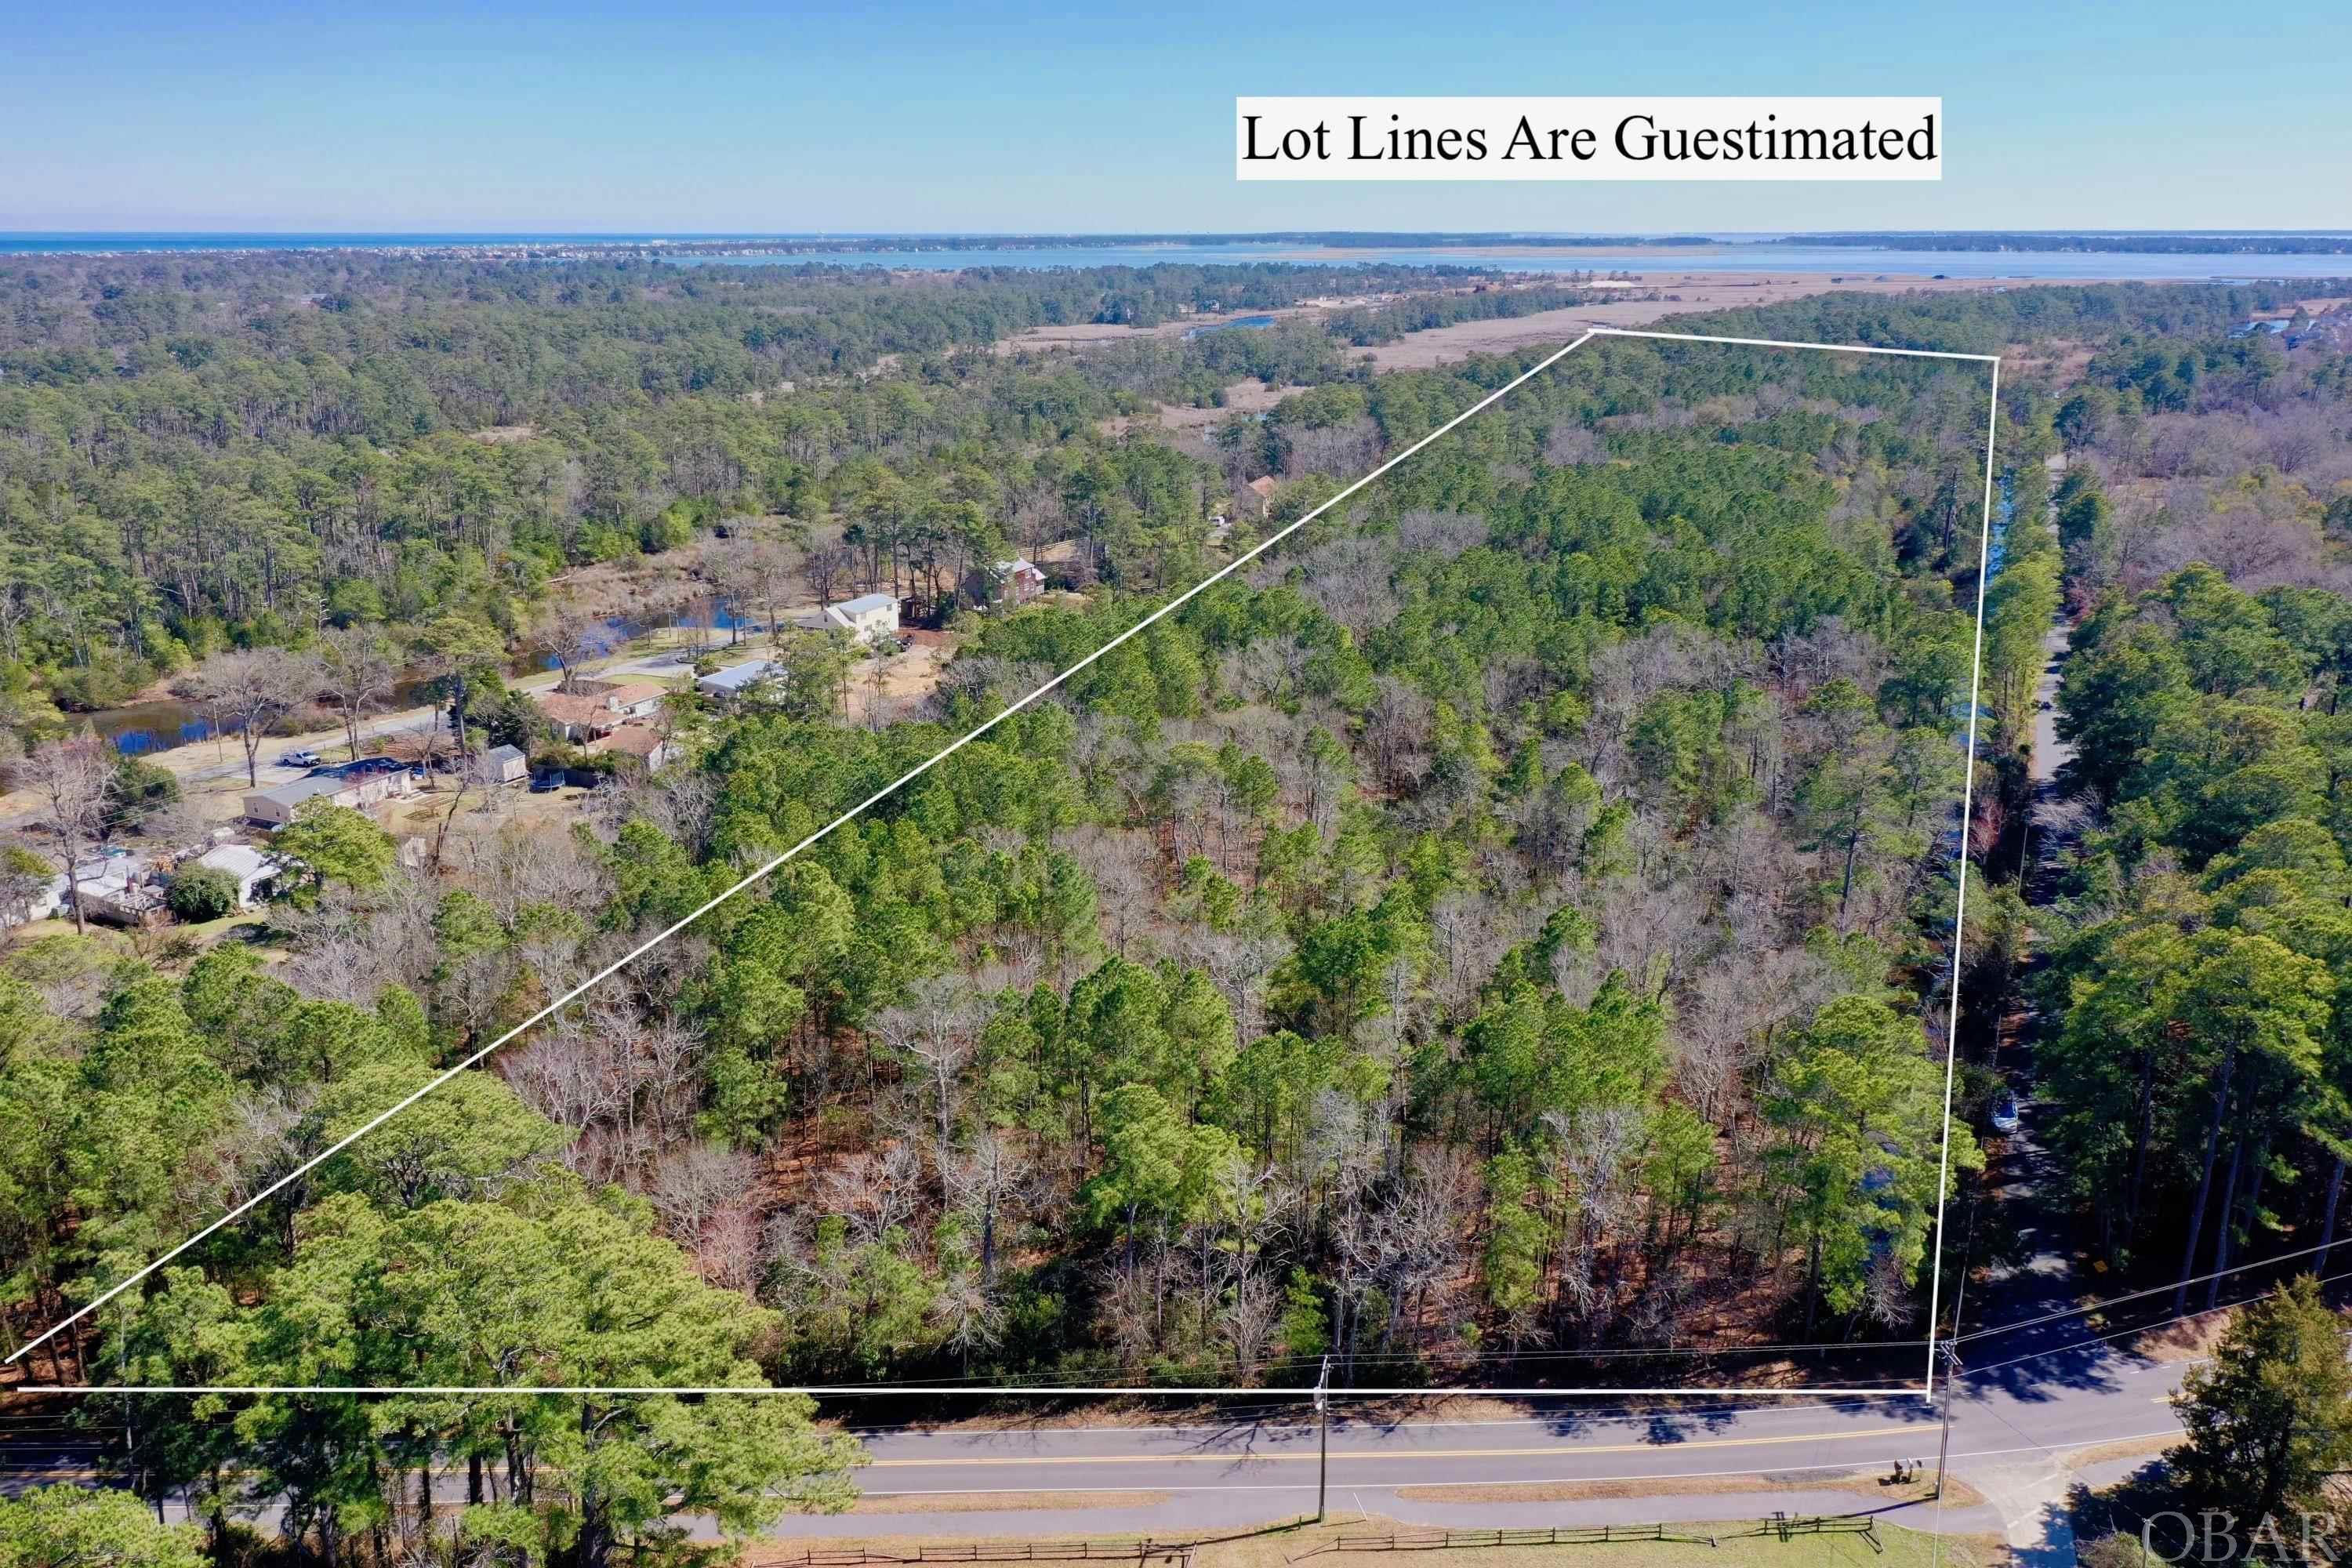 Imagine the possibilities with this beautiful 26+ acre parcel located in the heart of Kitty Hawk Village. Enjoy consistent elevations of 10 ft to 18 ft along the natural ridge running through the property and creating some of the highest and most beautiful land in Kitty Hawk. Savor this extraordinary location adjoining the Kitty Hawk Woods Preserve which includes 1,890 acres of maritime forest, sand dunes, hiking trails, and canals. All this right outside your door with the ultimate backdrop of serenity in the woods. When walking the property it feels like you're being hugged by nature; so beautifully relaxing and surrounded by the purity of wildlife, trees, birds, and more! The natural vegetation, high ridges, and tranquil setting create a ONE OF A KIND location and opportunity. You truly have your very own nature sanctuary while being minutes from beach or sound! Here's your chance to have a little bit of country, privacy and seclusion, in the middle of the hustle and bustle of beach life! The possibilities are endless; Zoned VR-1 Low density Village Residential District: Bed and Breakfast, small subdivision, horse farm, or homestead. Some preliminary work for a subdivision has been completed and in associated docs, but please note that was only for 22 acres. This parcel includes Lots # 4, 5, 6, 7, 8 and 9. Please call listing agent to assist in walking the property.